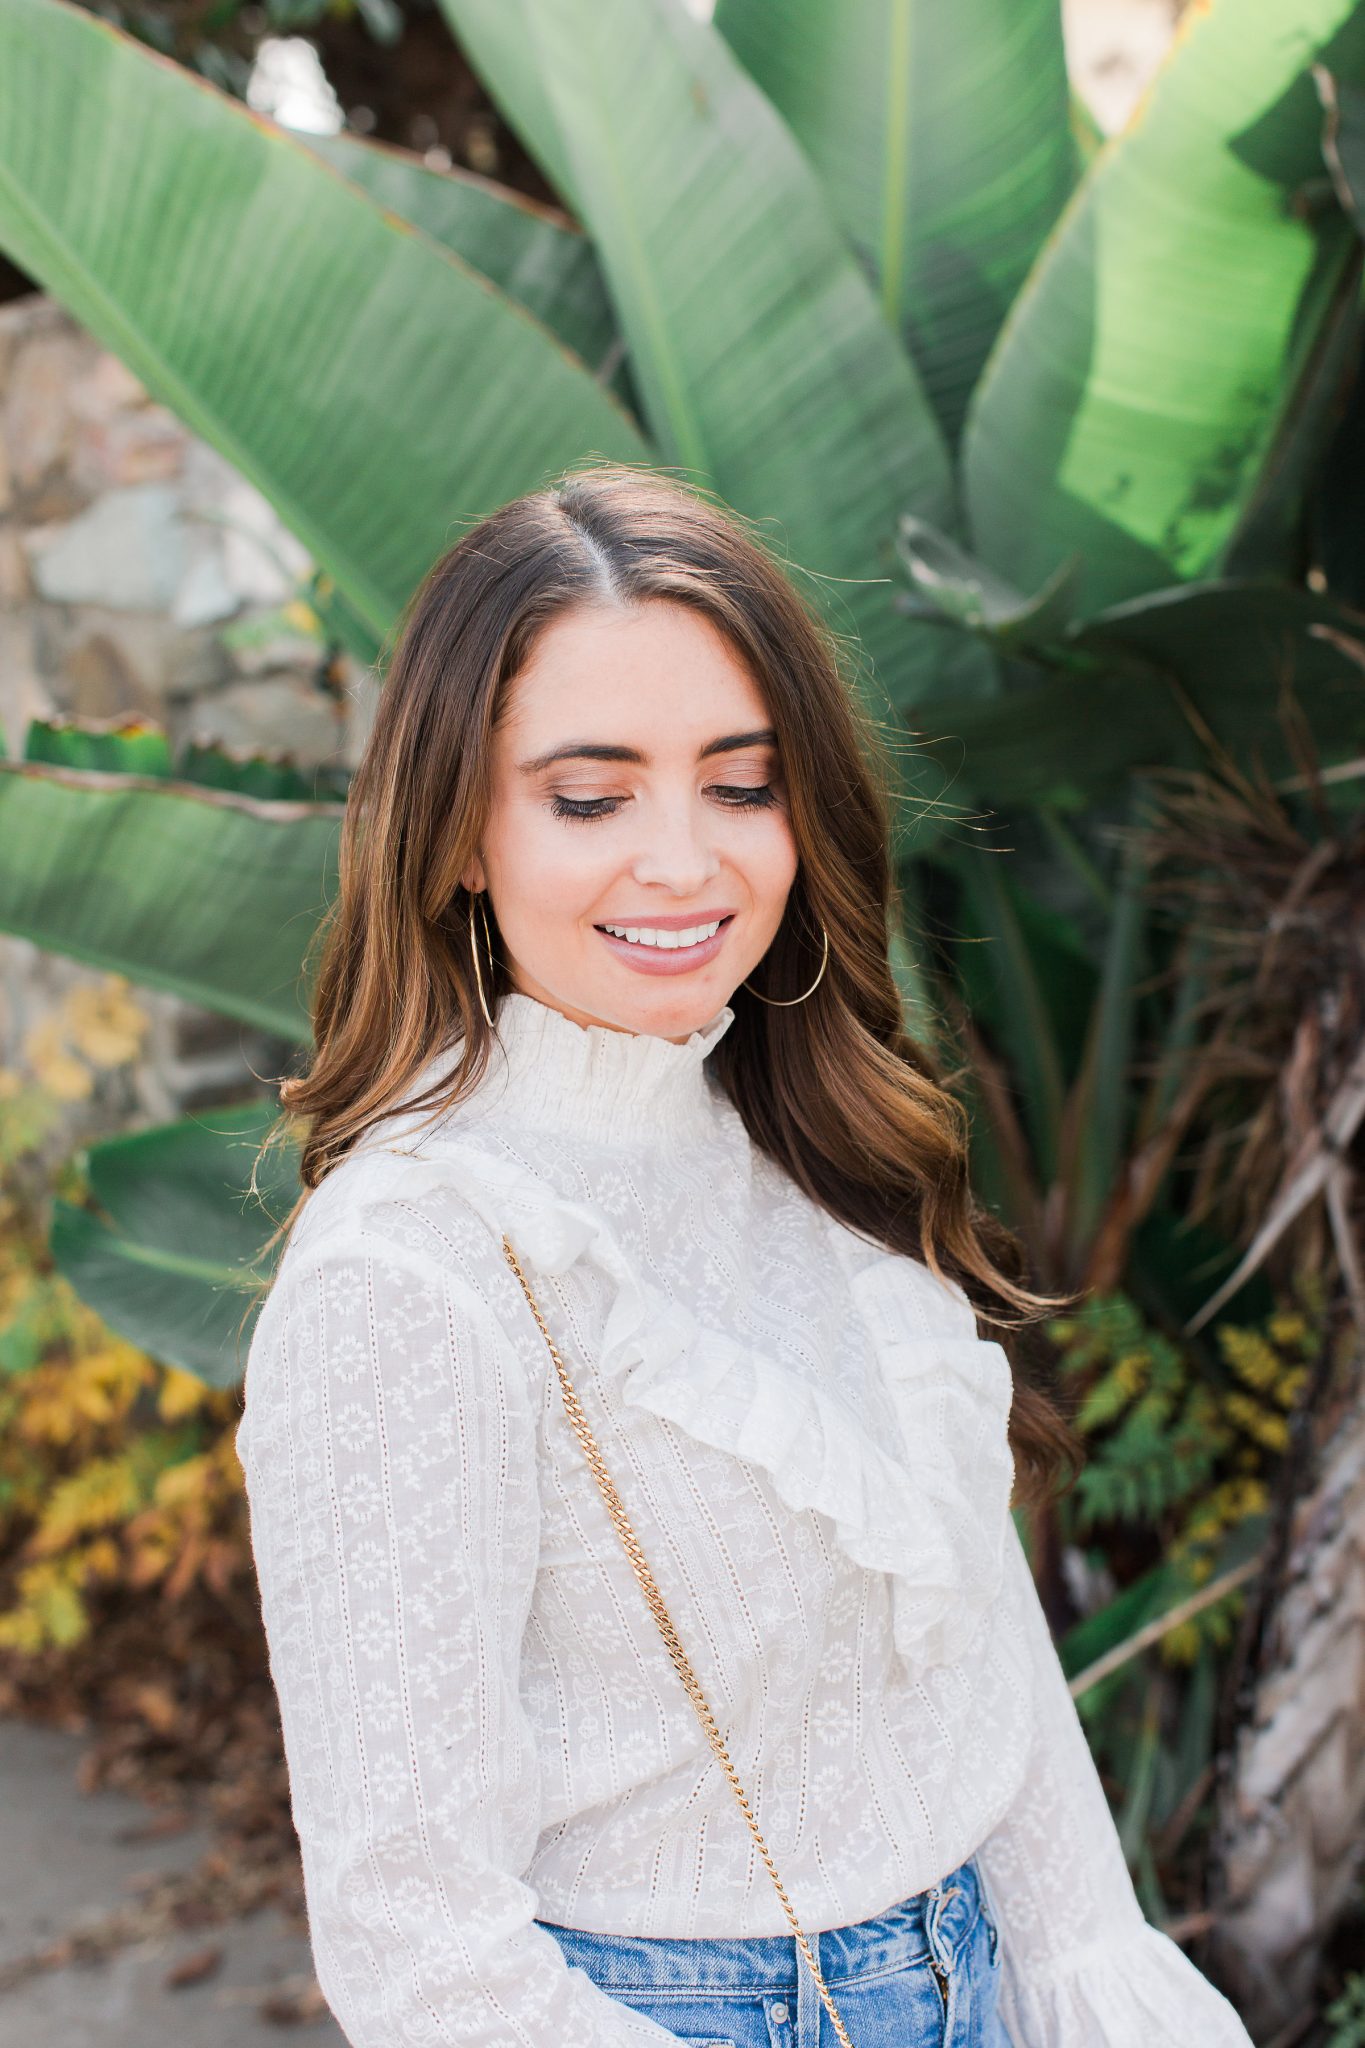 Maxie Elise | White lace top & distressed denim - New Year Resolutions by popular Orange County blogger Maxie Elise